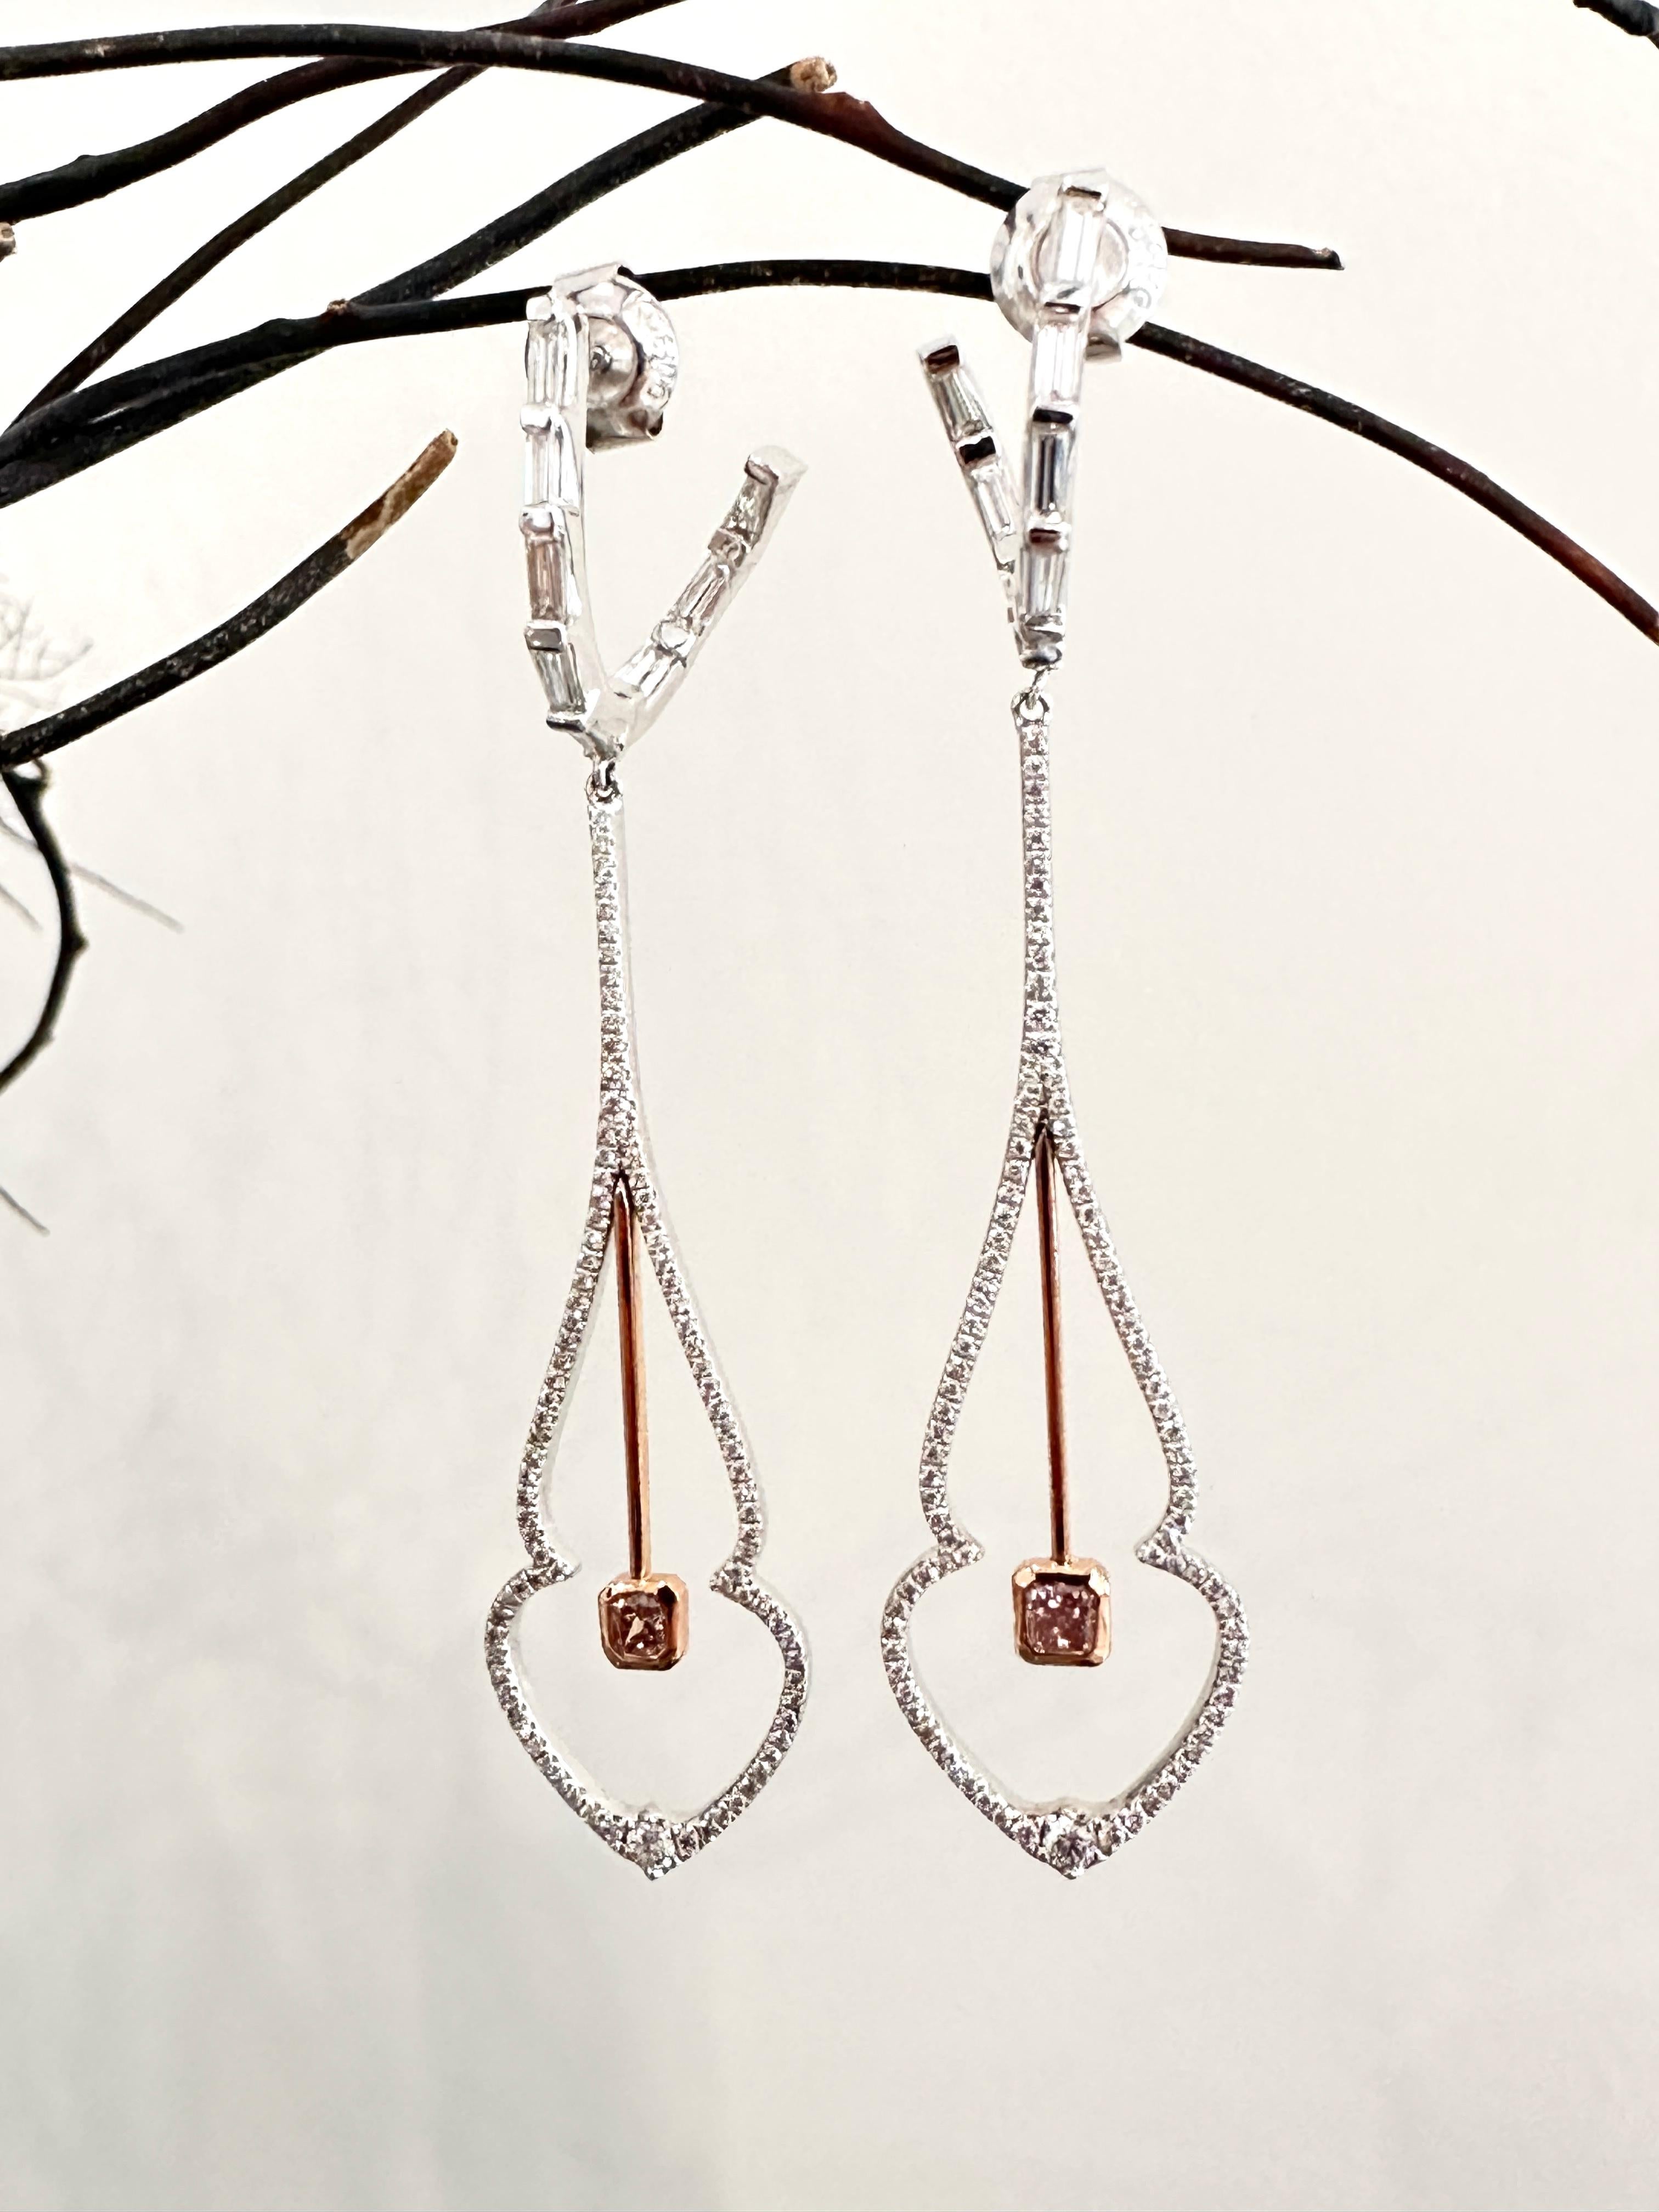 Pink diamond drop earrings designed in 18k white and rose gold. Including 2.2ctw diamonds and 0.14ct natural pink diamonds. 

These elongated elegant drop earrings are a bejeweled in baguette and pave diamonds. A firefly's wings are perfectly shaped